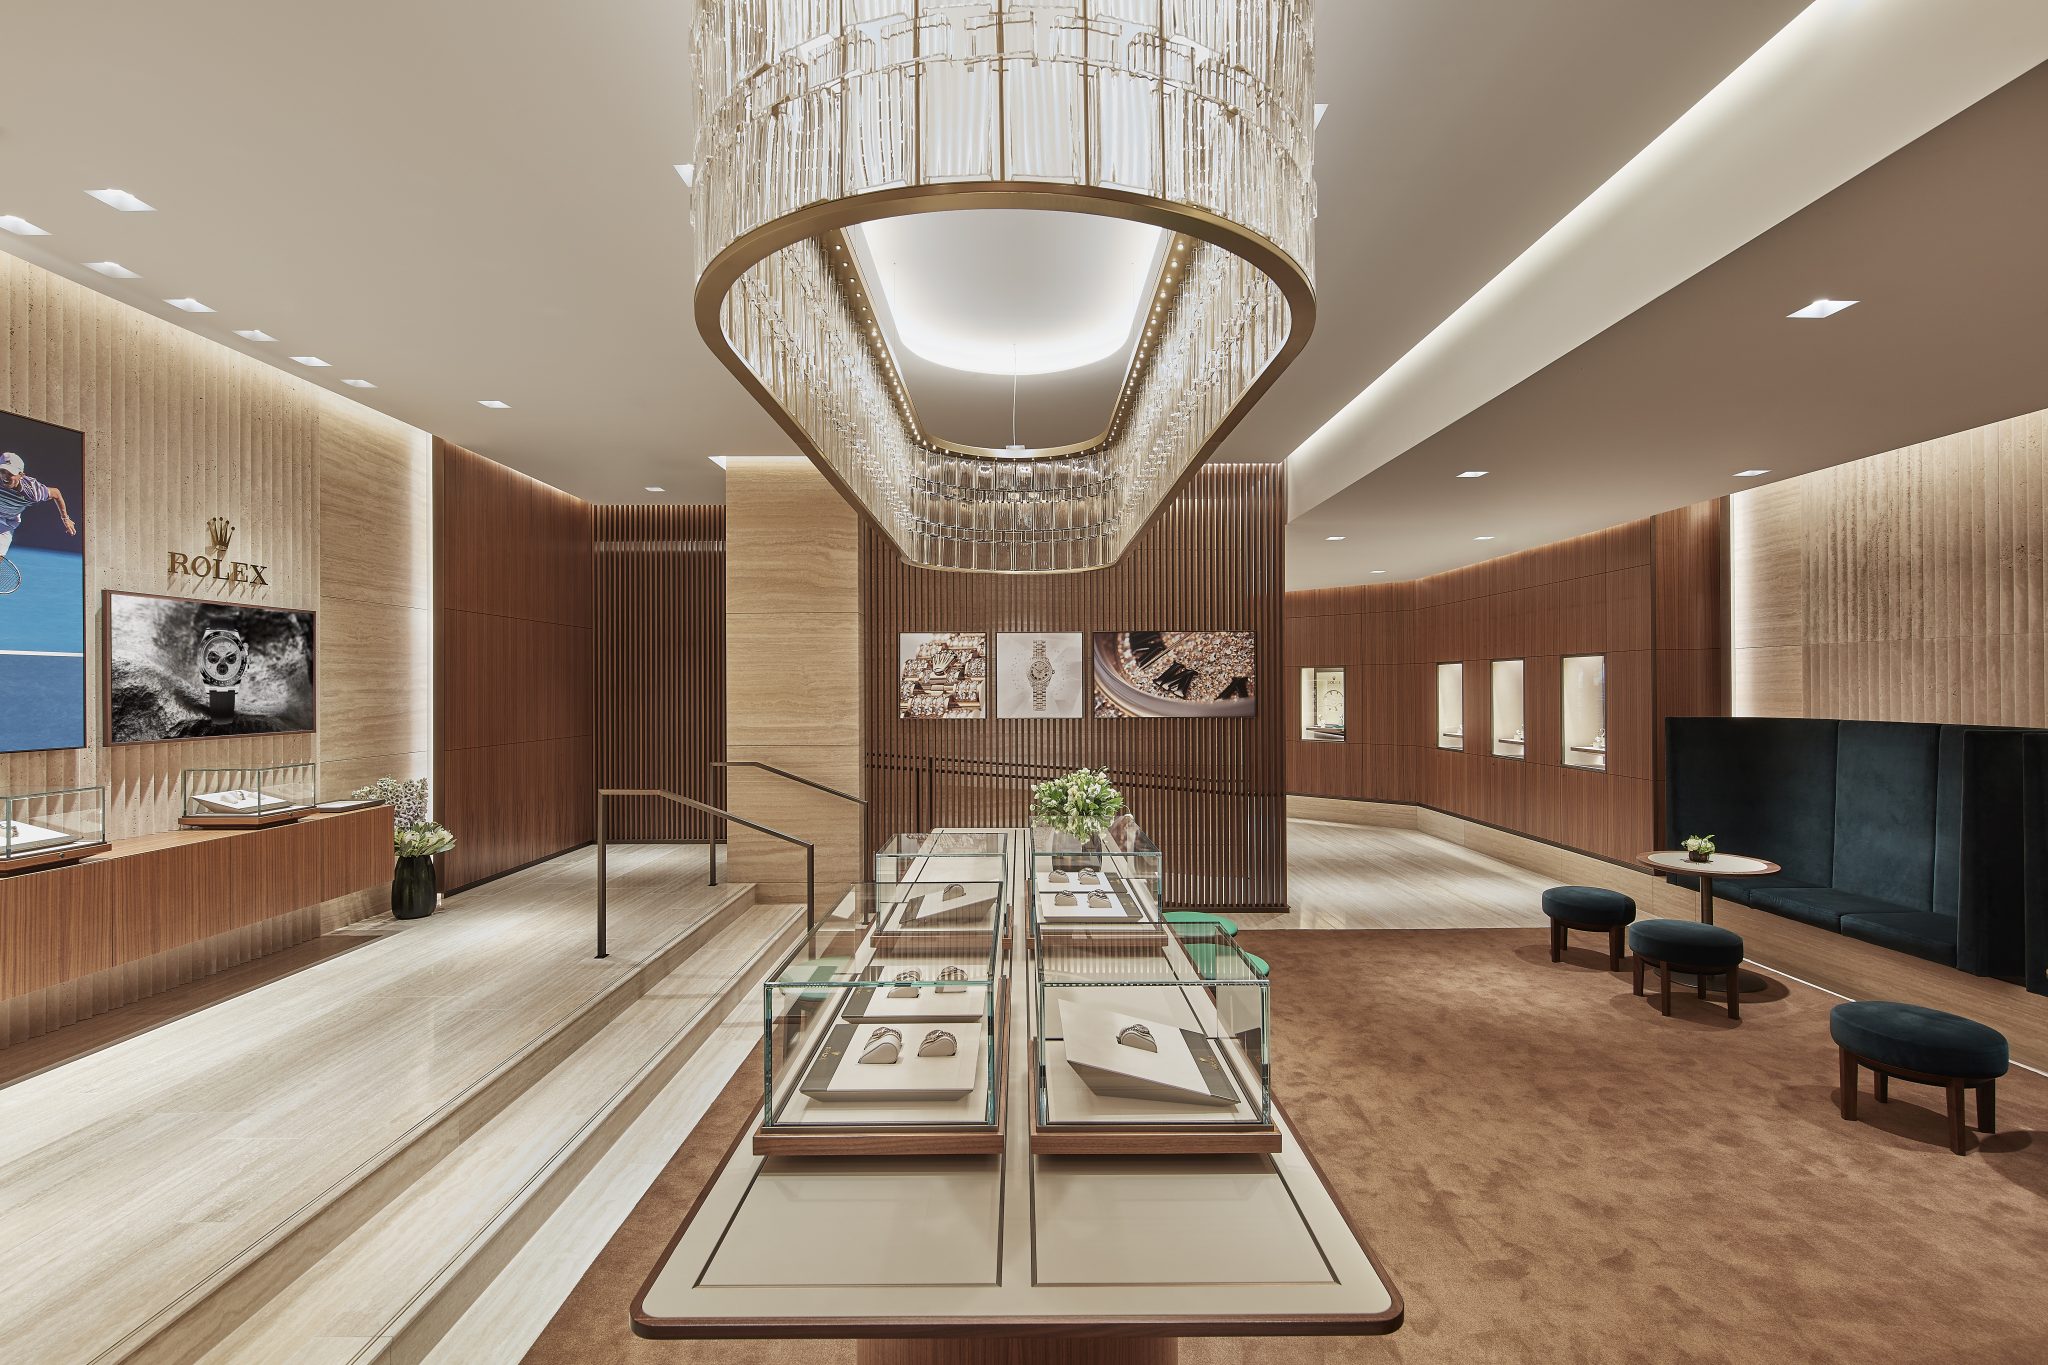 London Jewelers opens Rolex boutique in New Jersey's The Mall at Short Hills